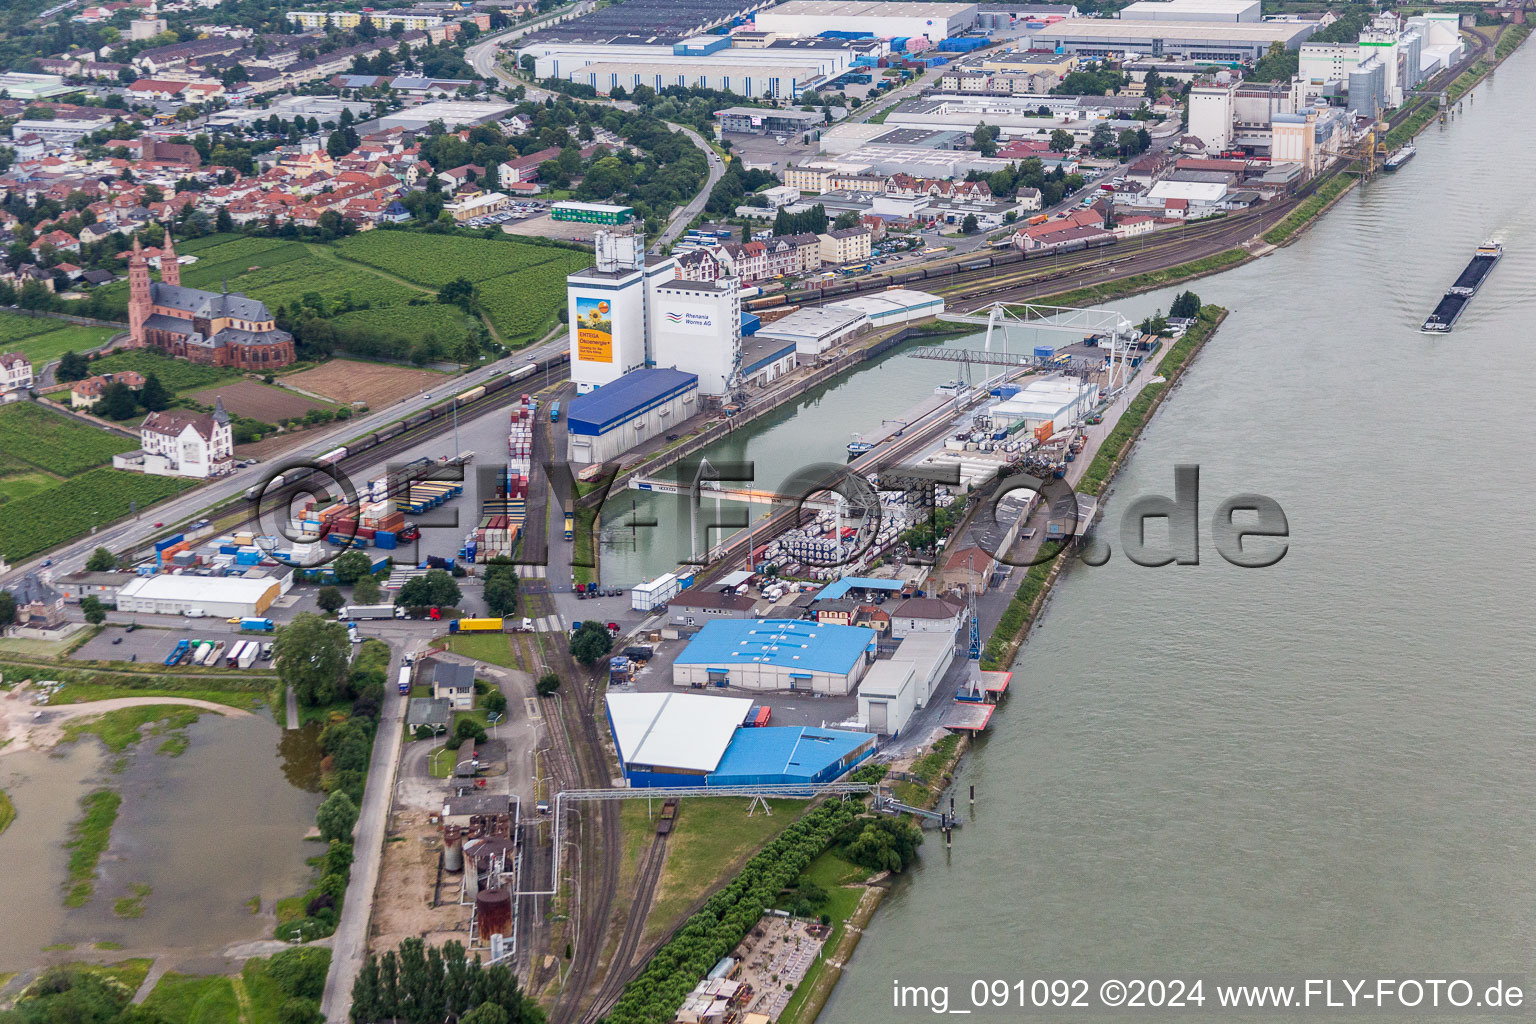 Quays and boat moorings at the port of the inland port of Rhenania Worms AG on the Rhine river in Worms in the state Rhineland-Palatinate, Germany